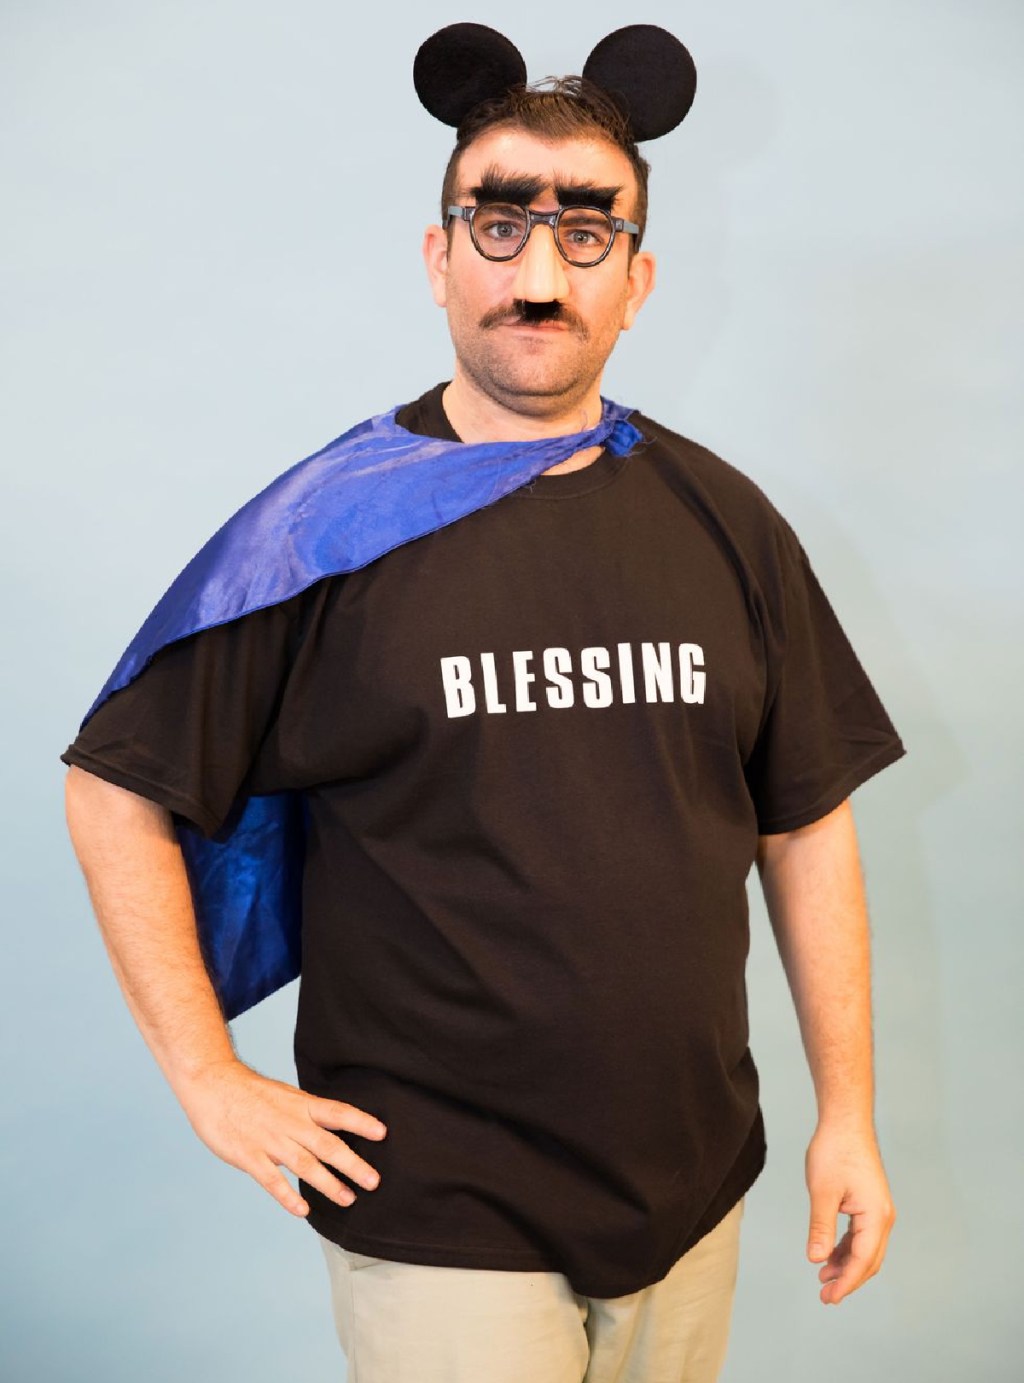 Blessing in Disguise DIY Halloween costume ideas for adults